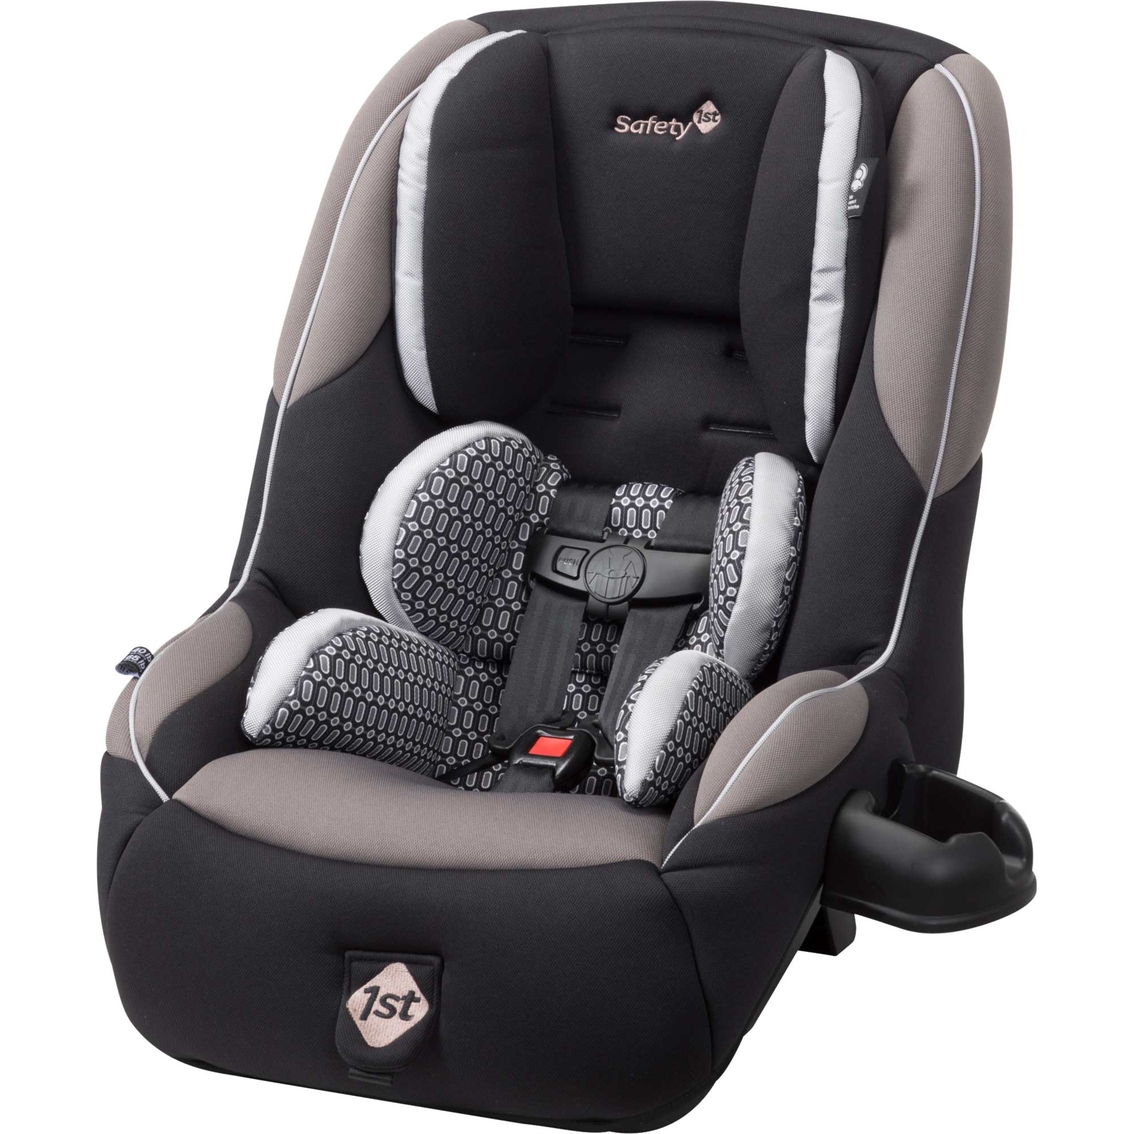 Safety 1st Guide 65 Air Convertible Car Seat, Chambers (Black, Espresso & Silver)